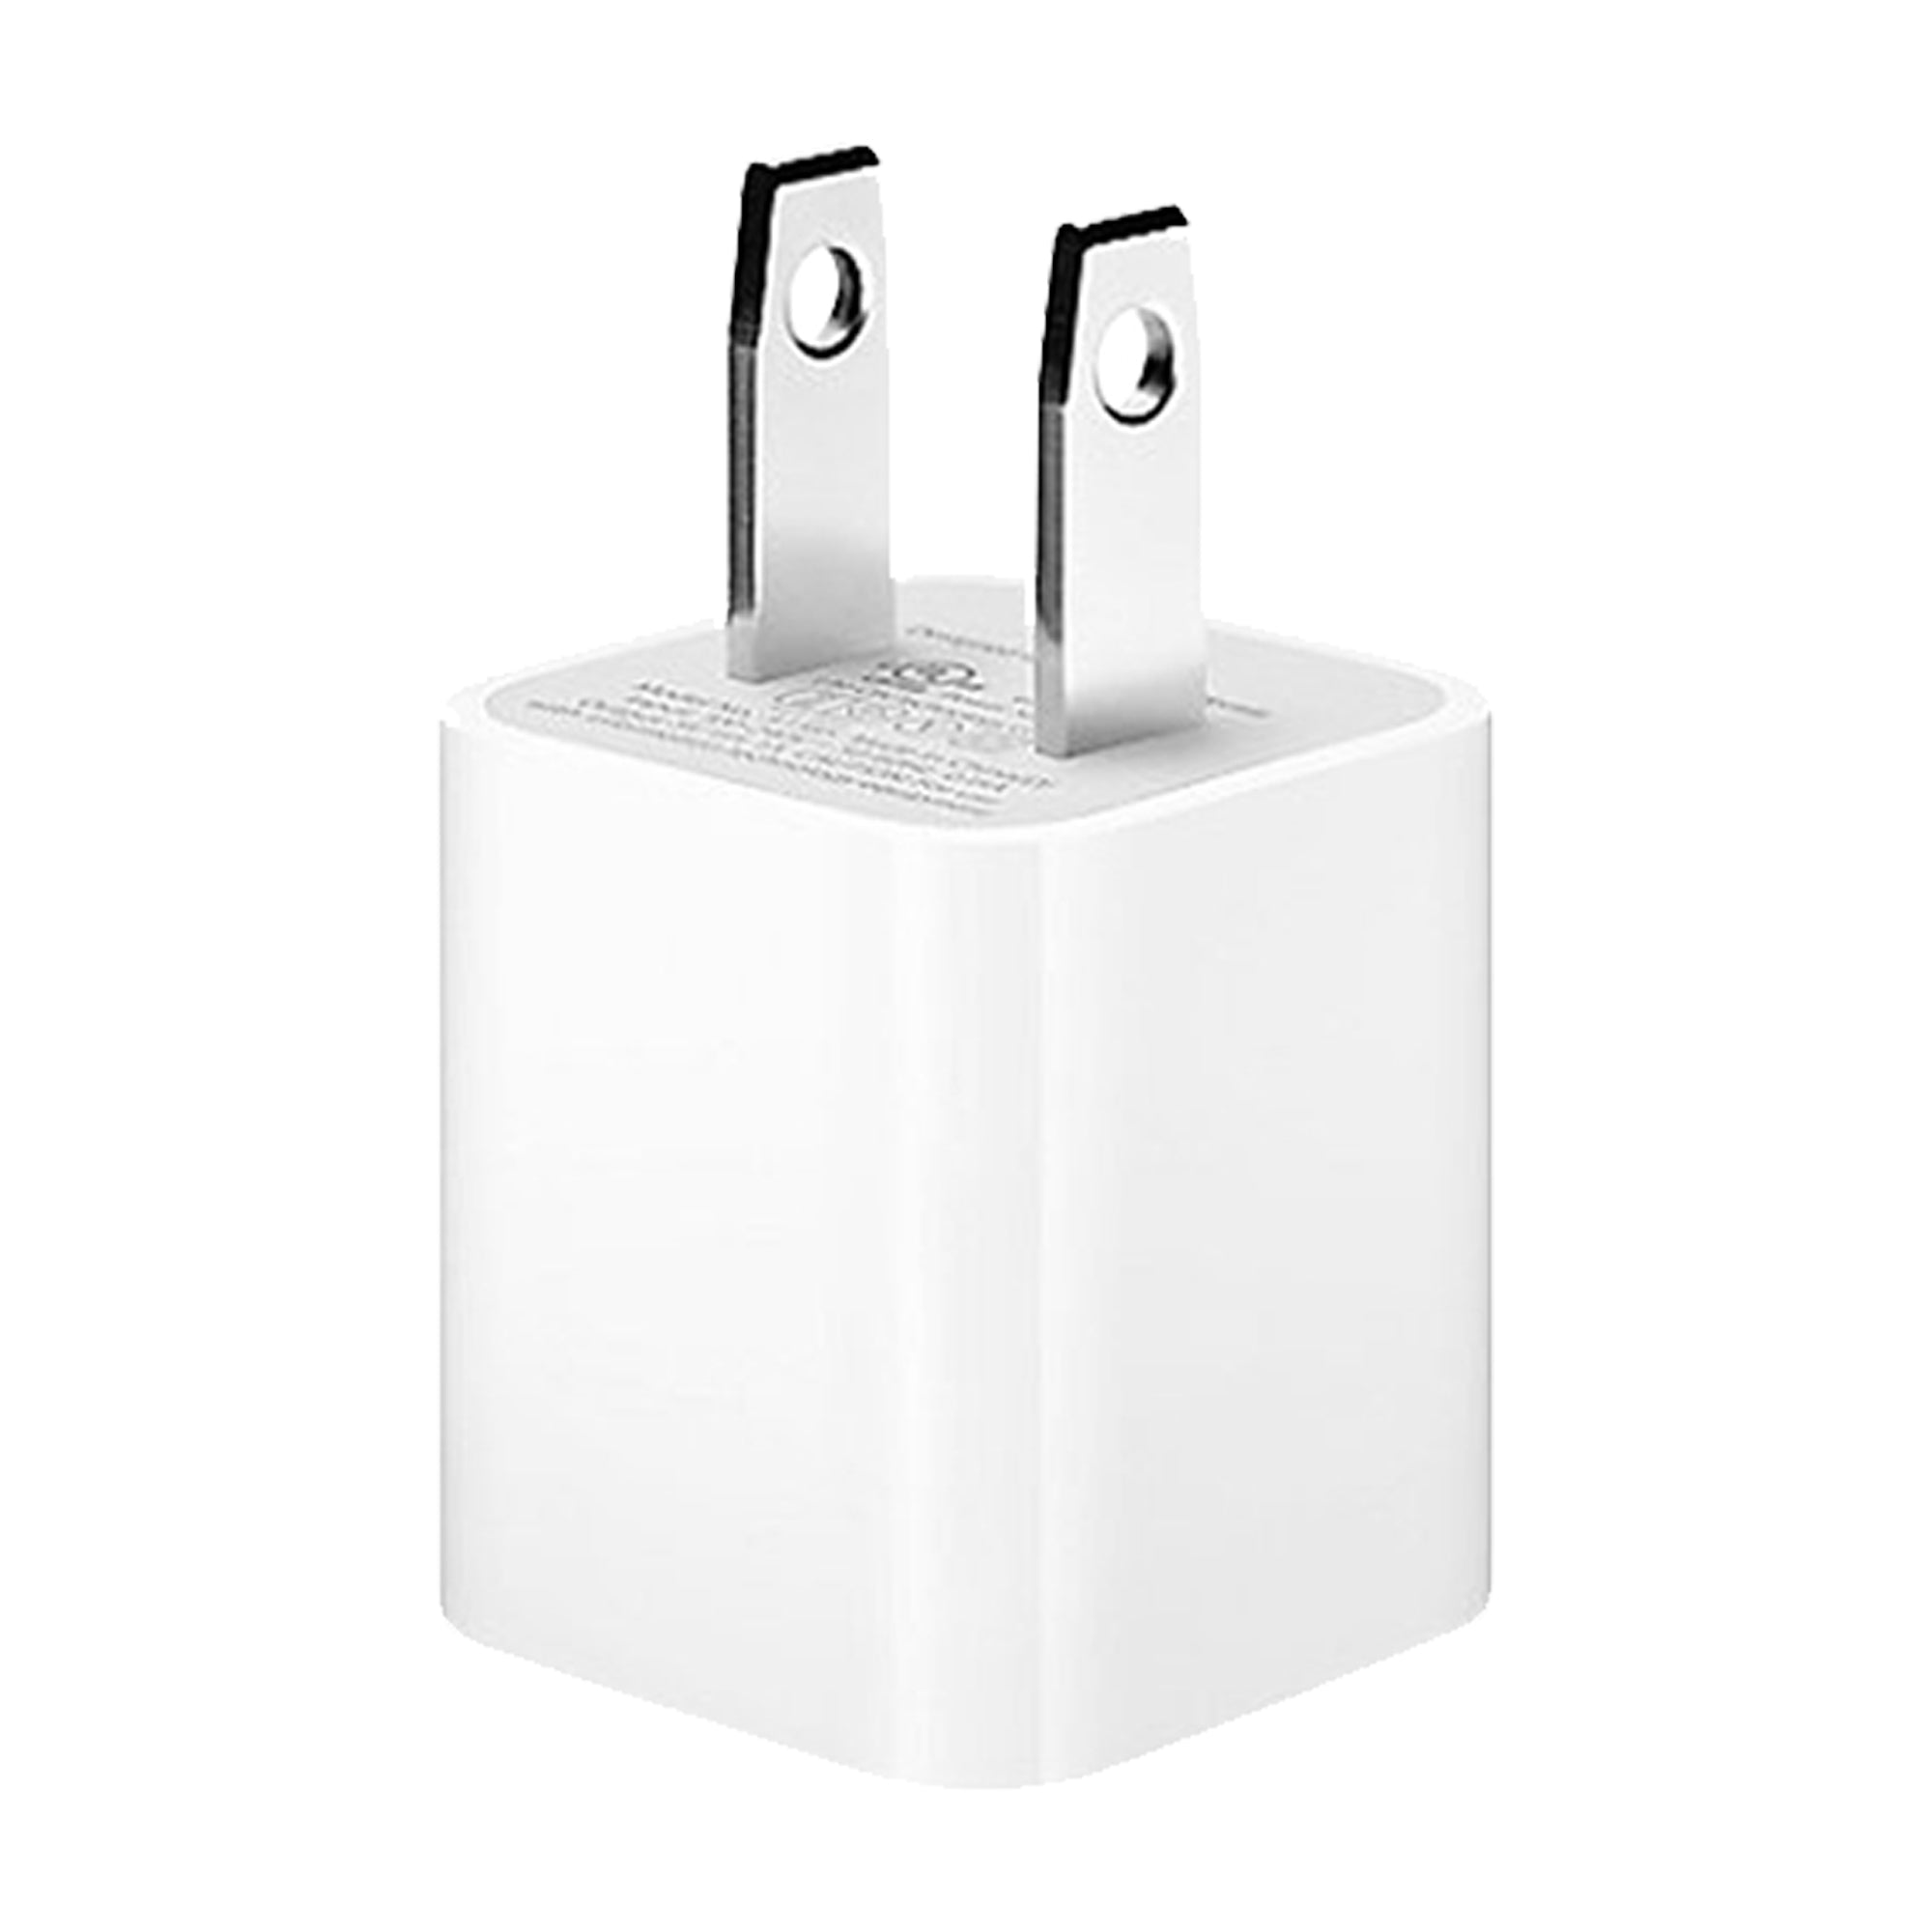 iTouch Charging Cube: White affordable charger